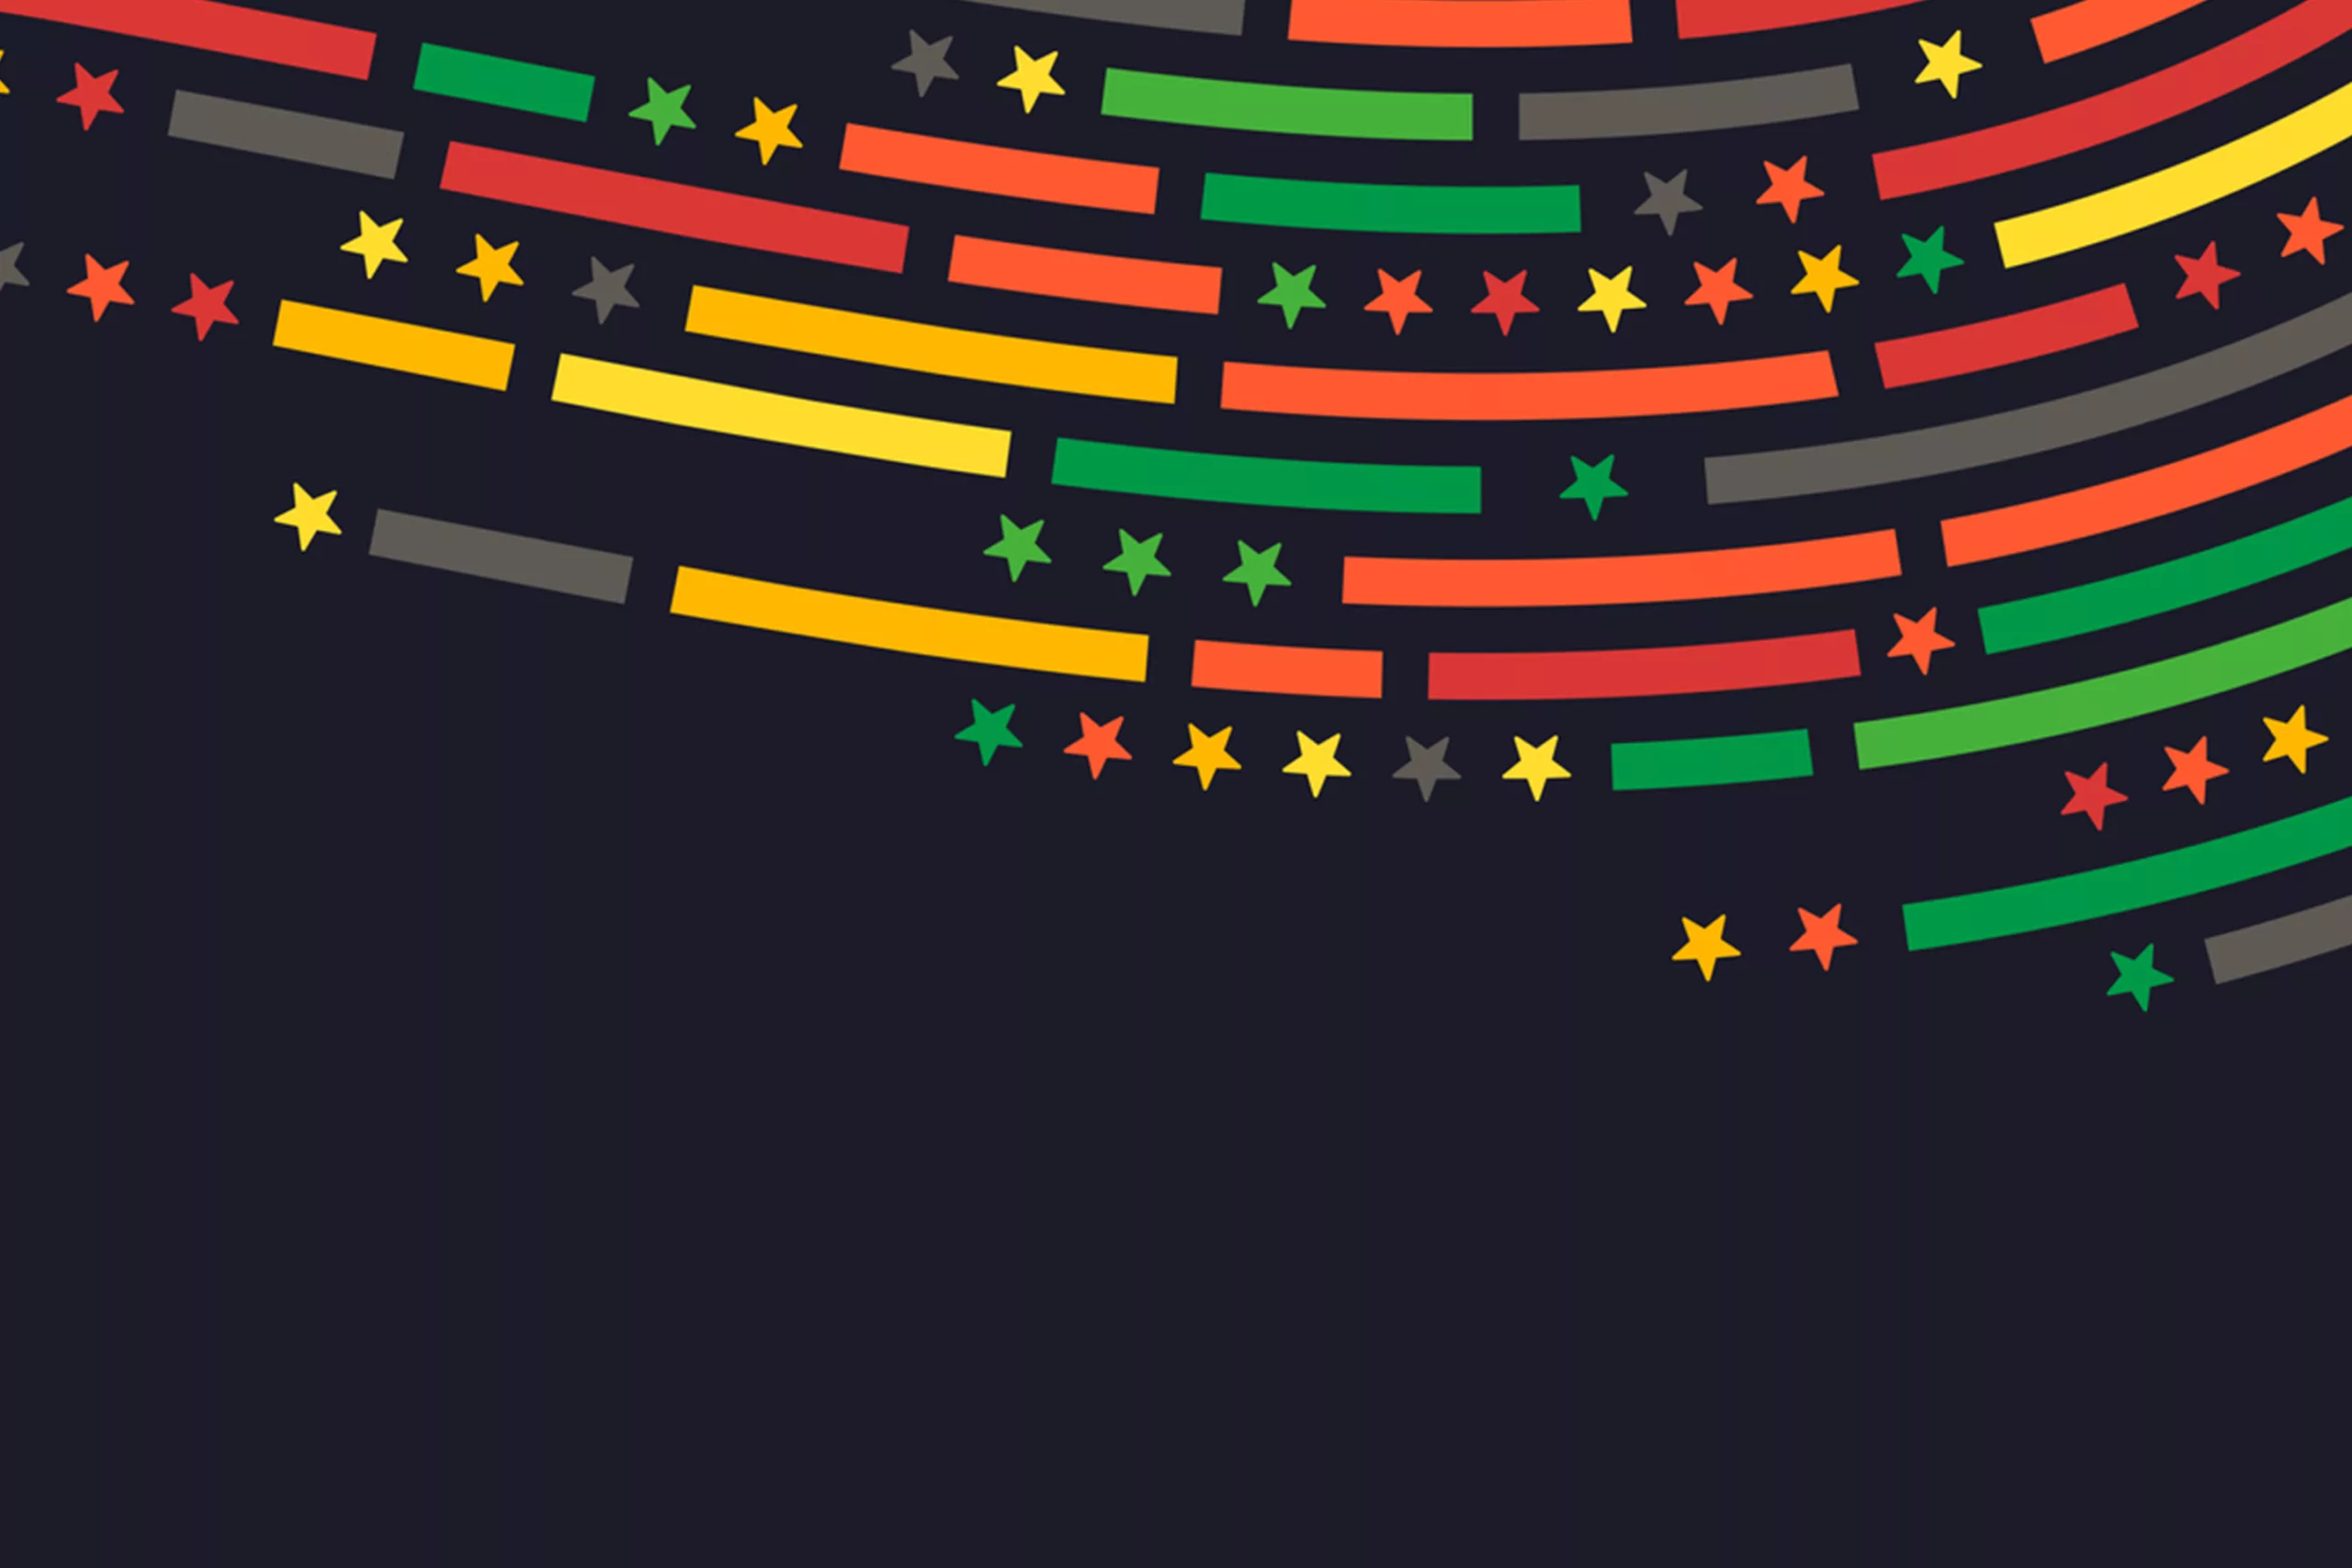 A banner of green, orange, red, and yellow stars and colorblocks stand out against a black background